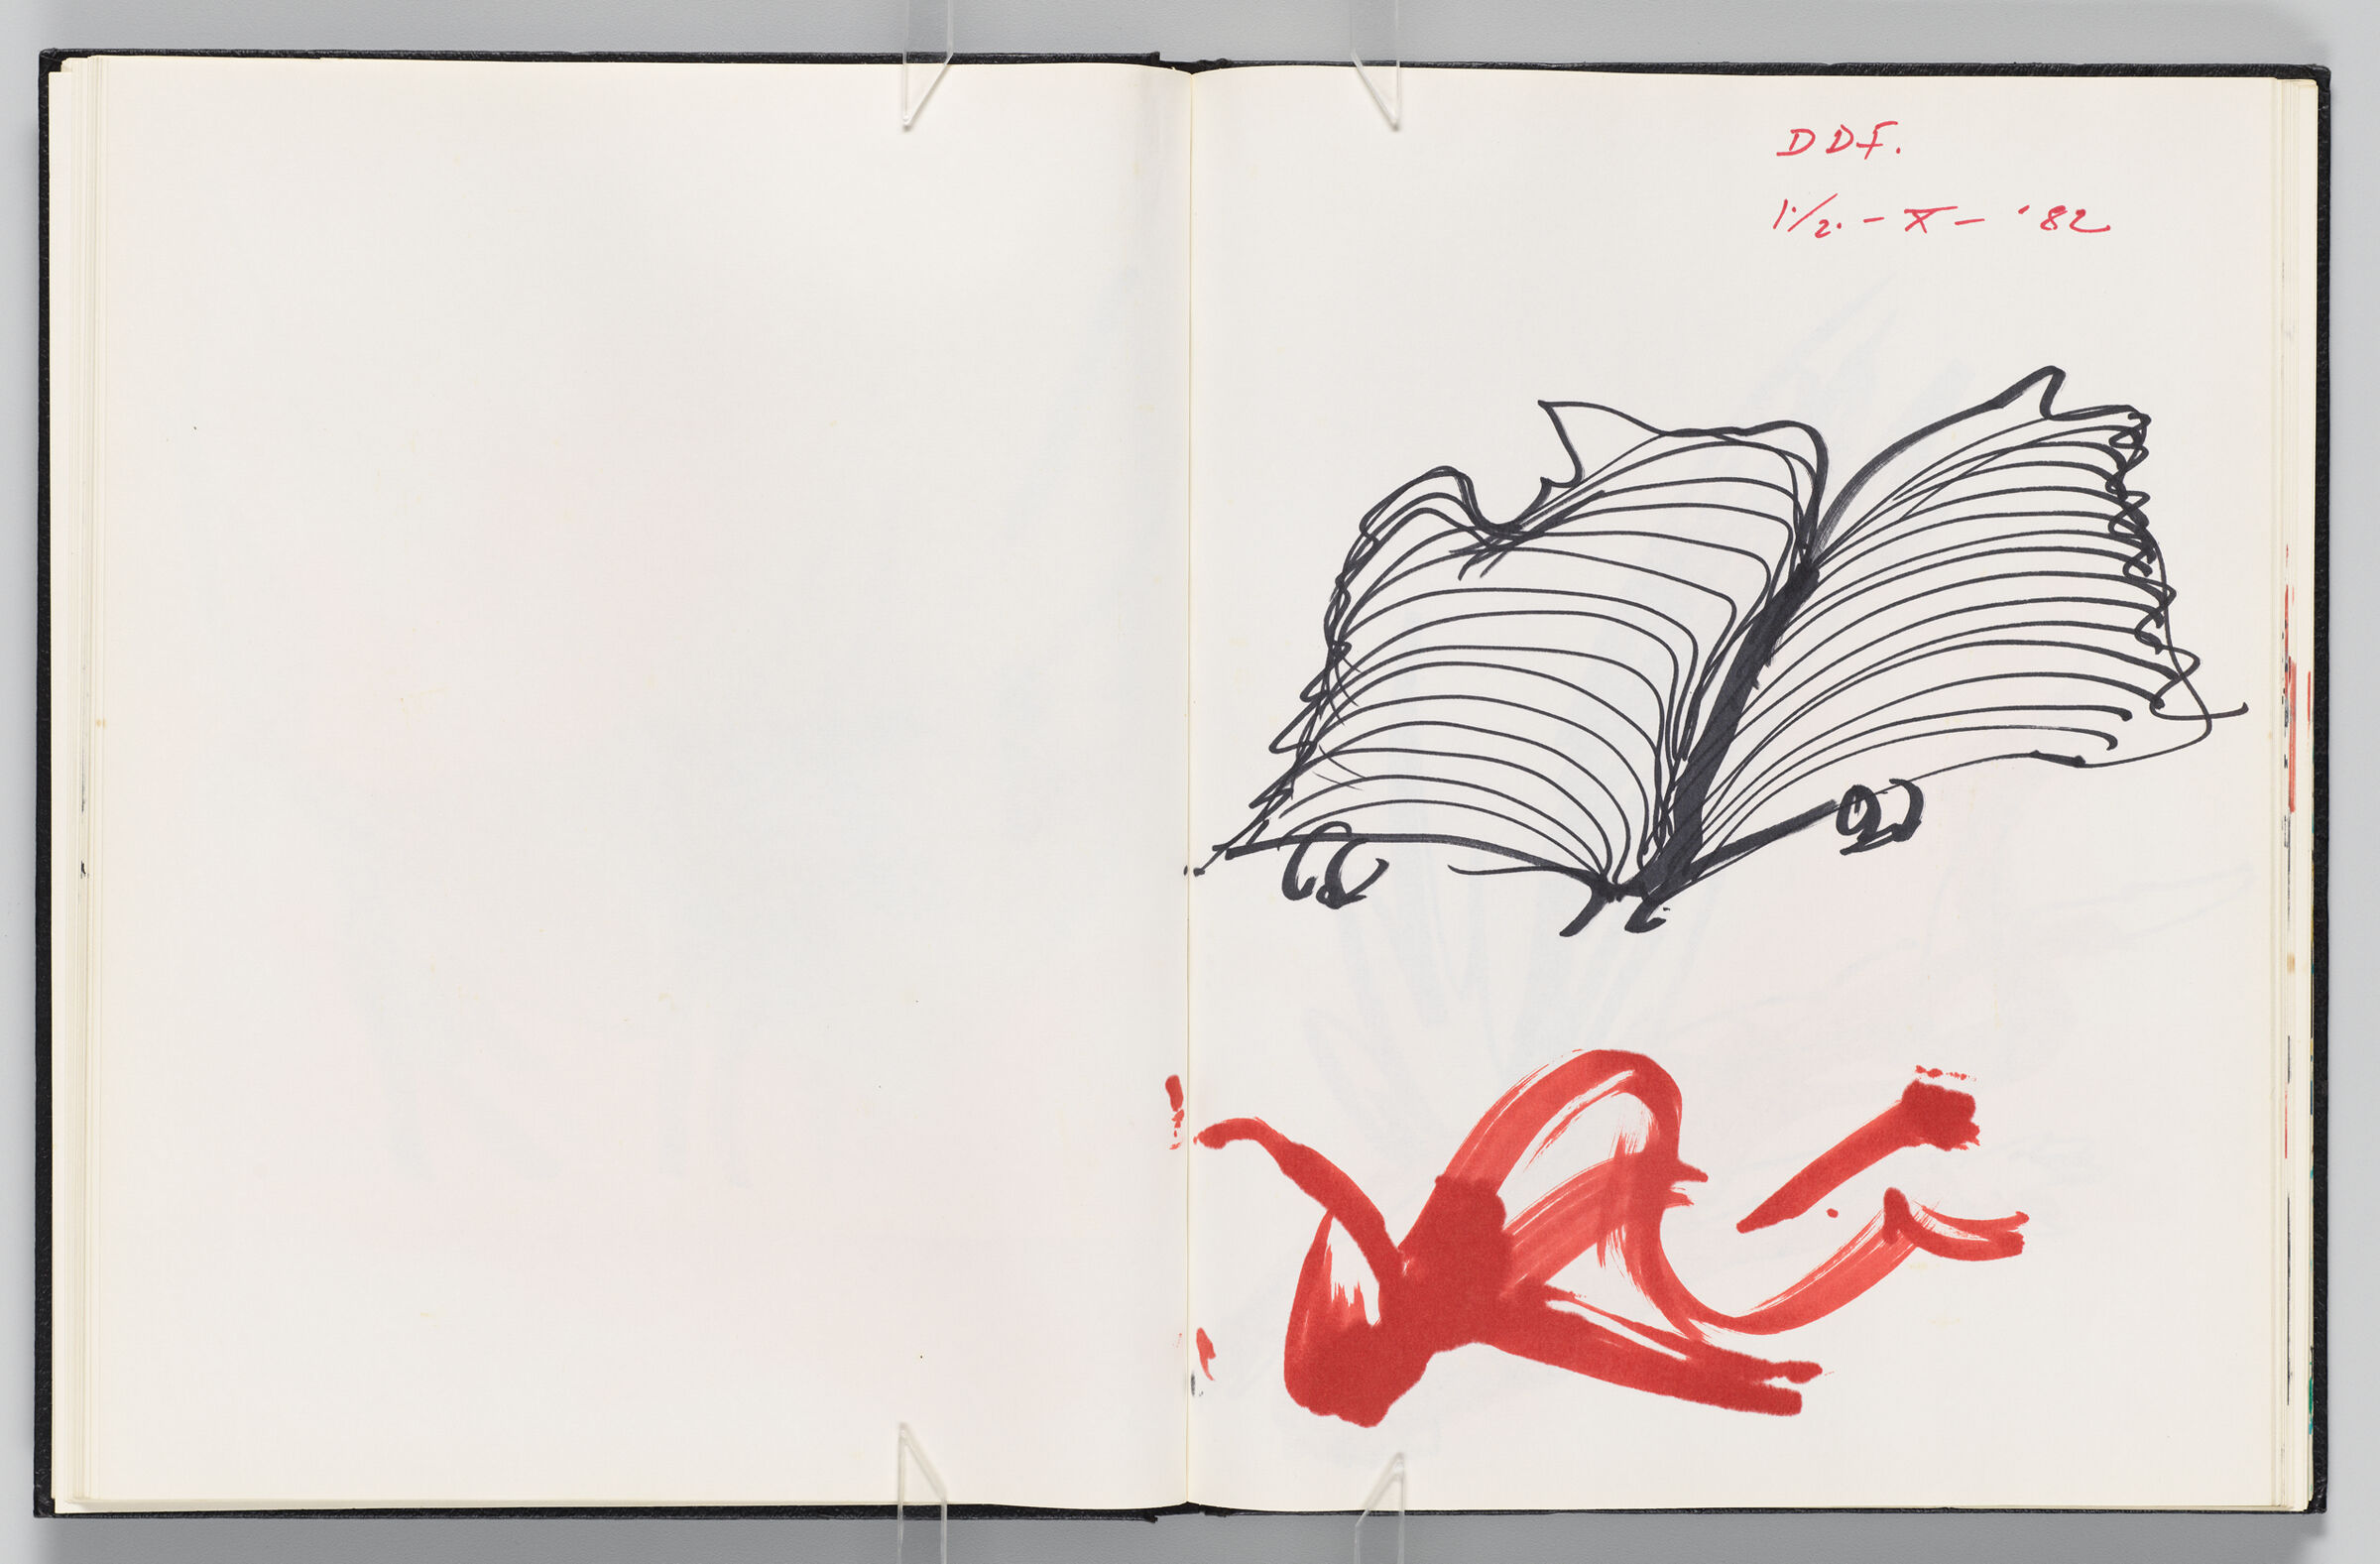 Untitled (Blank, Left Page); Untitled (Notes And Icarus Sketches, Right Page)